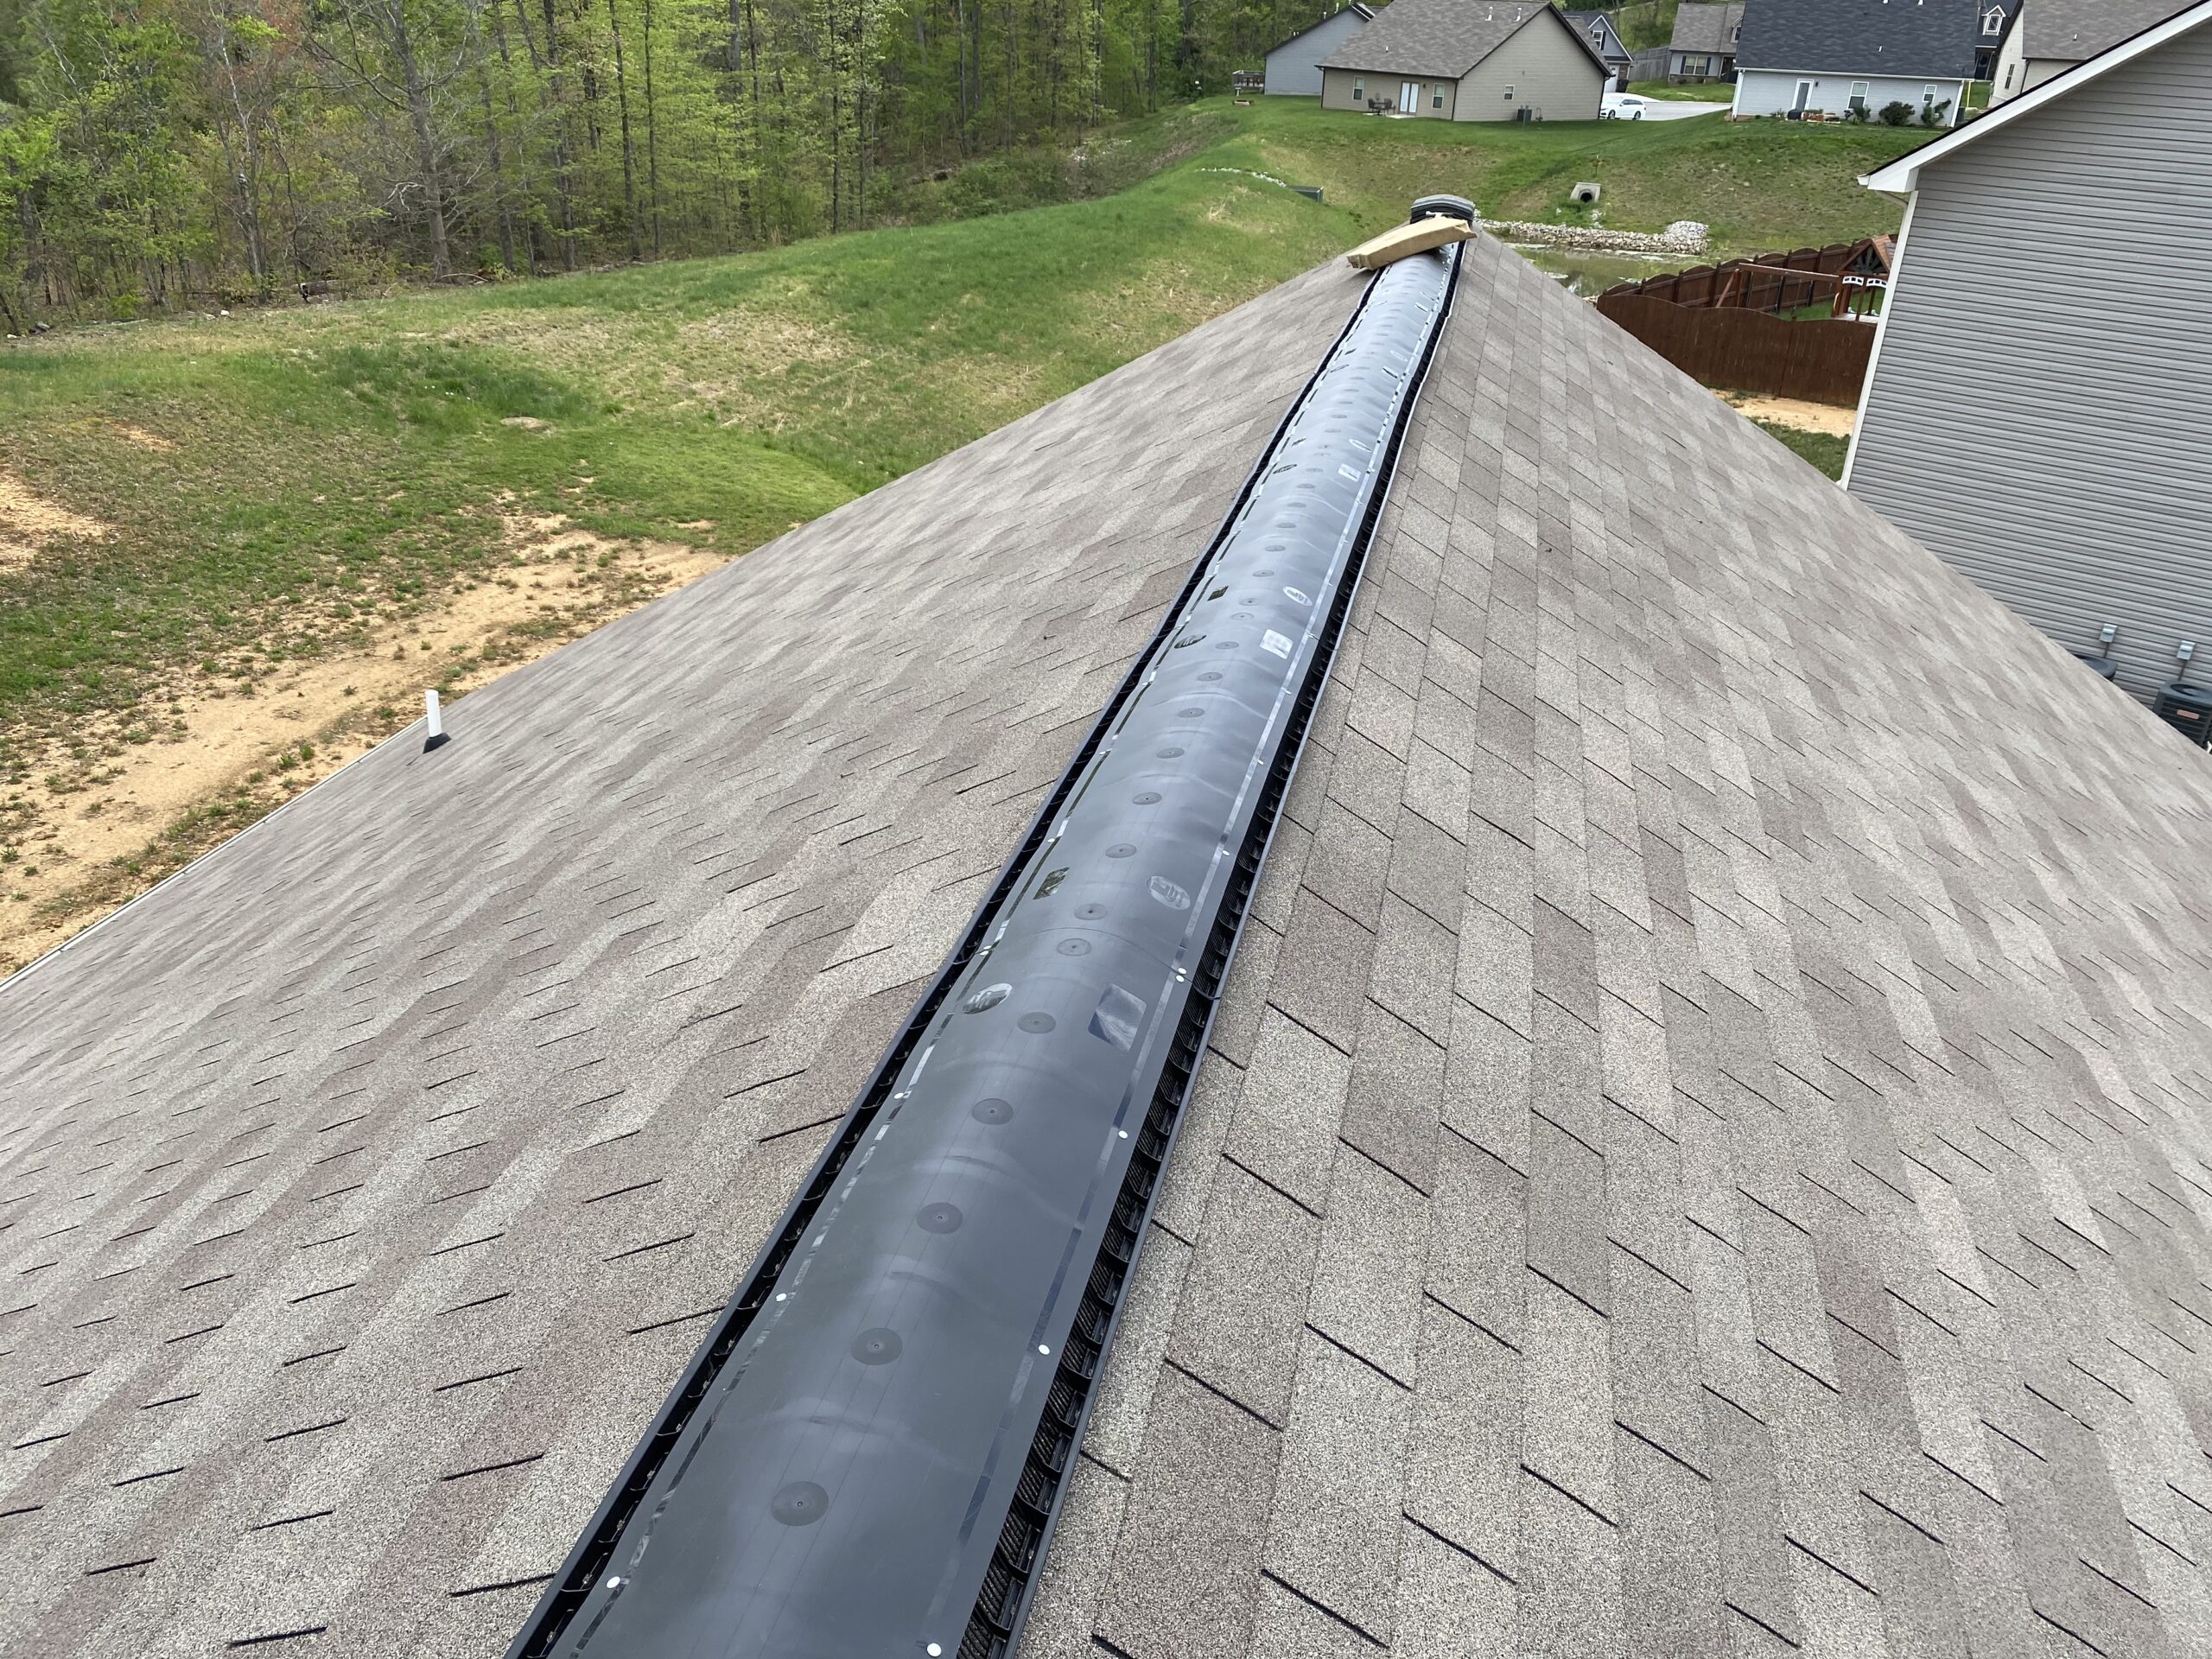 This is a picture of a black plastic ridge vent without shingles on it